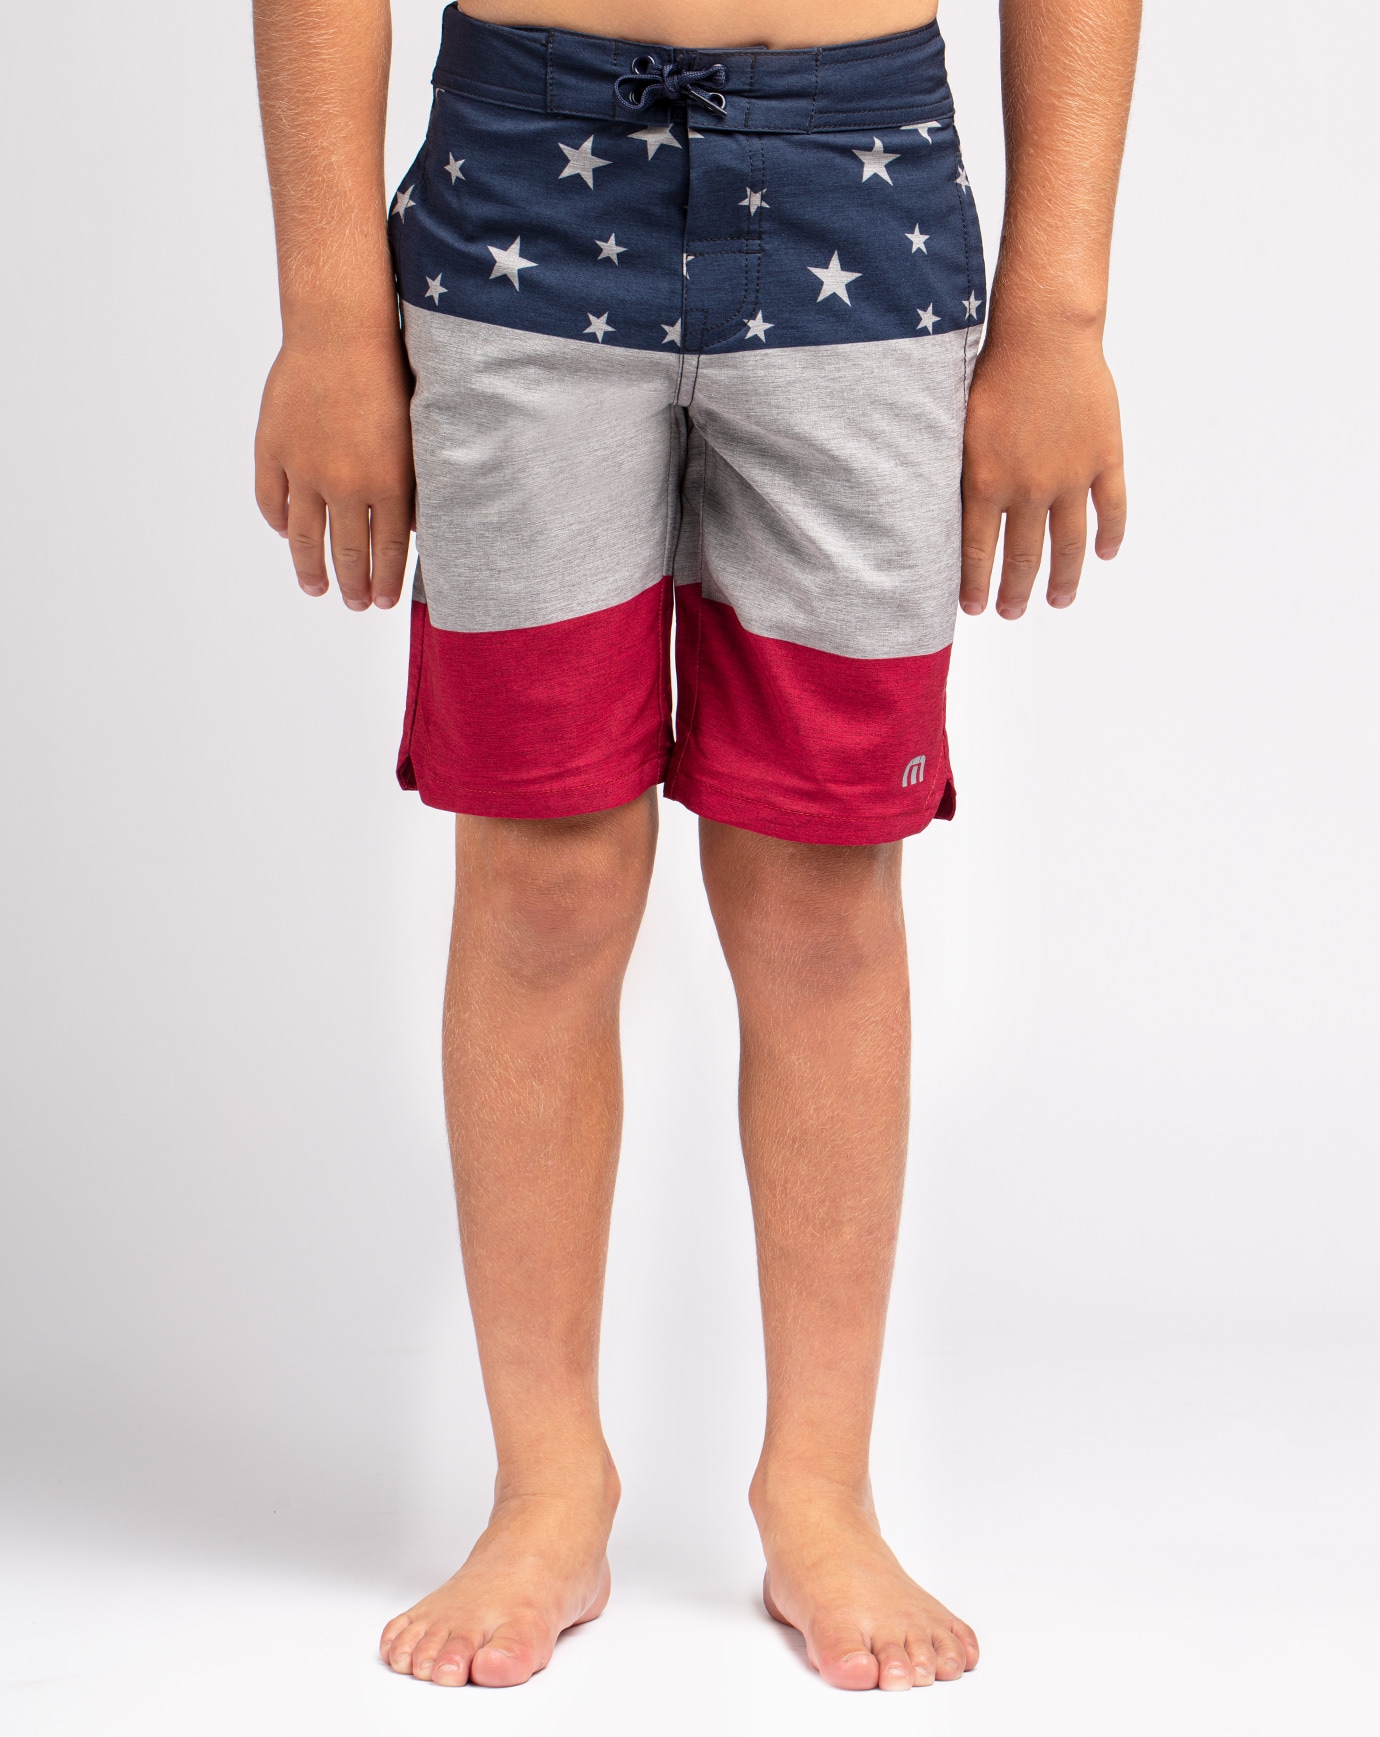 Related Product - TICKER TAPE YOUTH BOARDSHORT